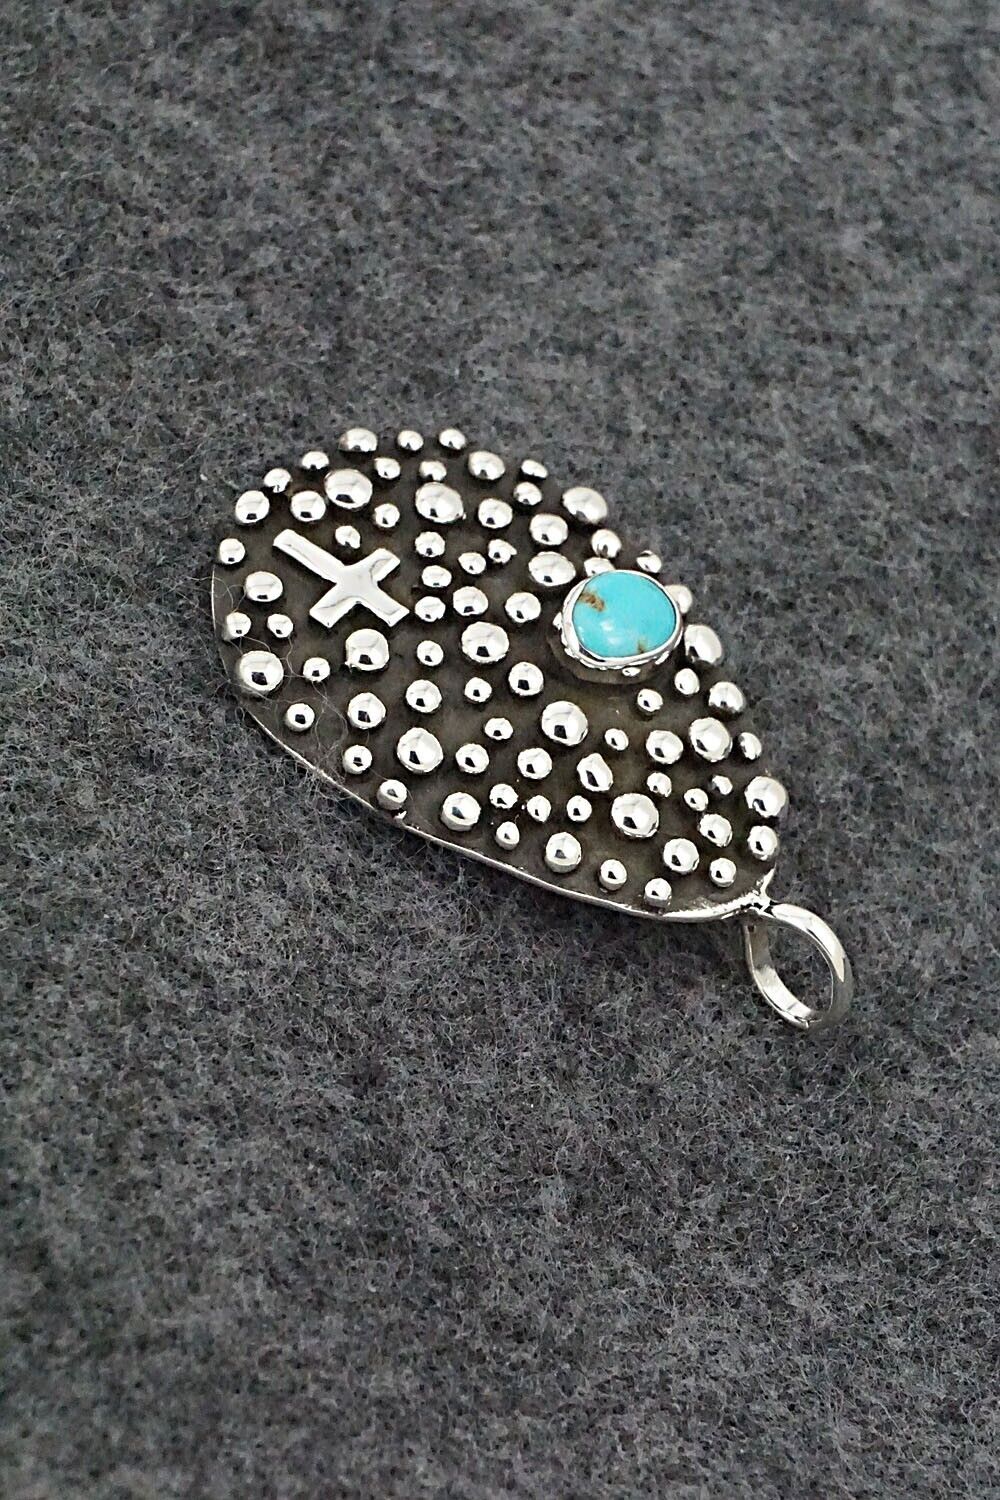 Turquoise & Sterling Silver Pendant - Akee Douglas